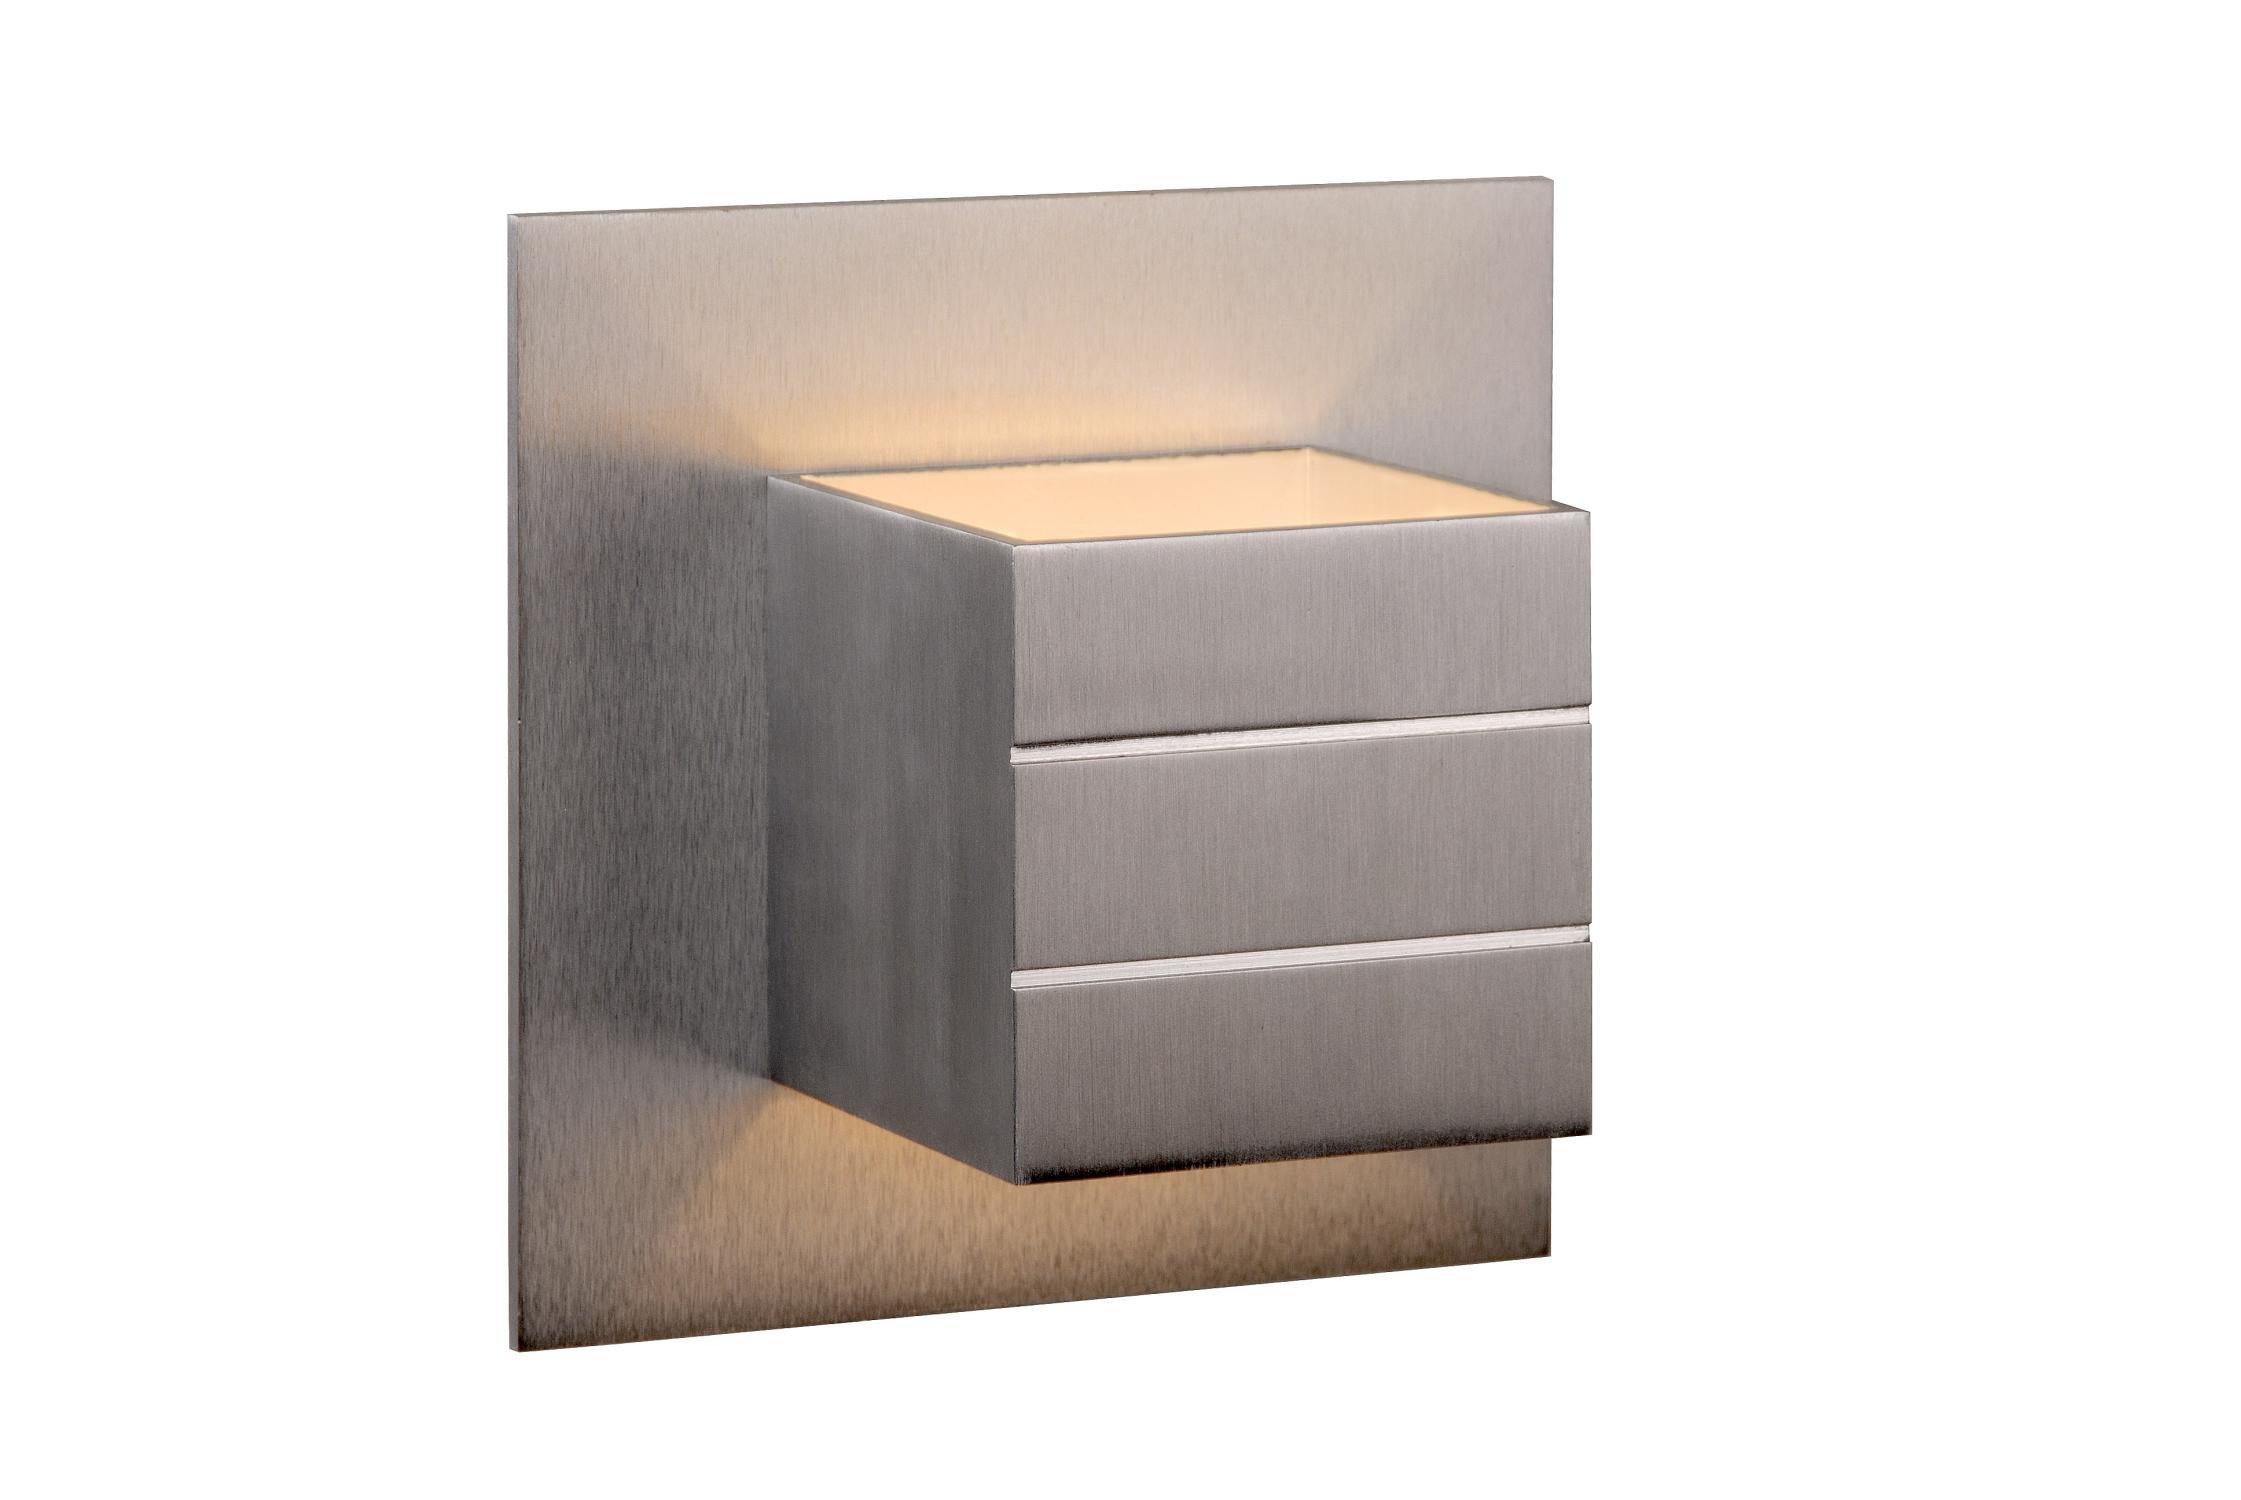 Lucide BOK Wall Light Stylish Dimmable Lamp Indoor Mountable Decorative Lighting